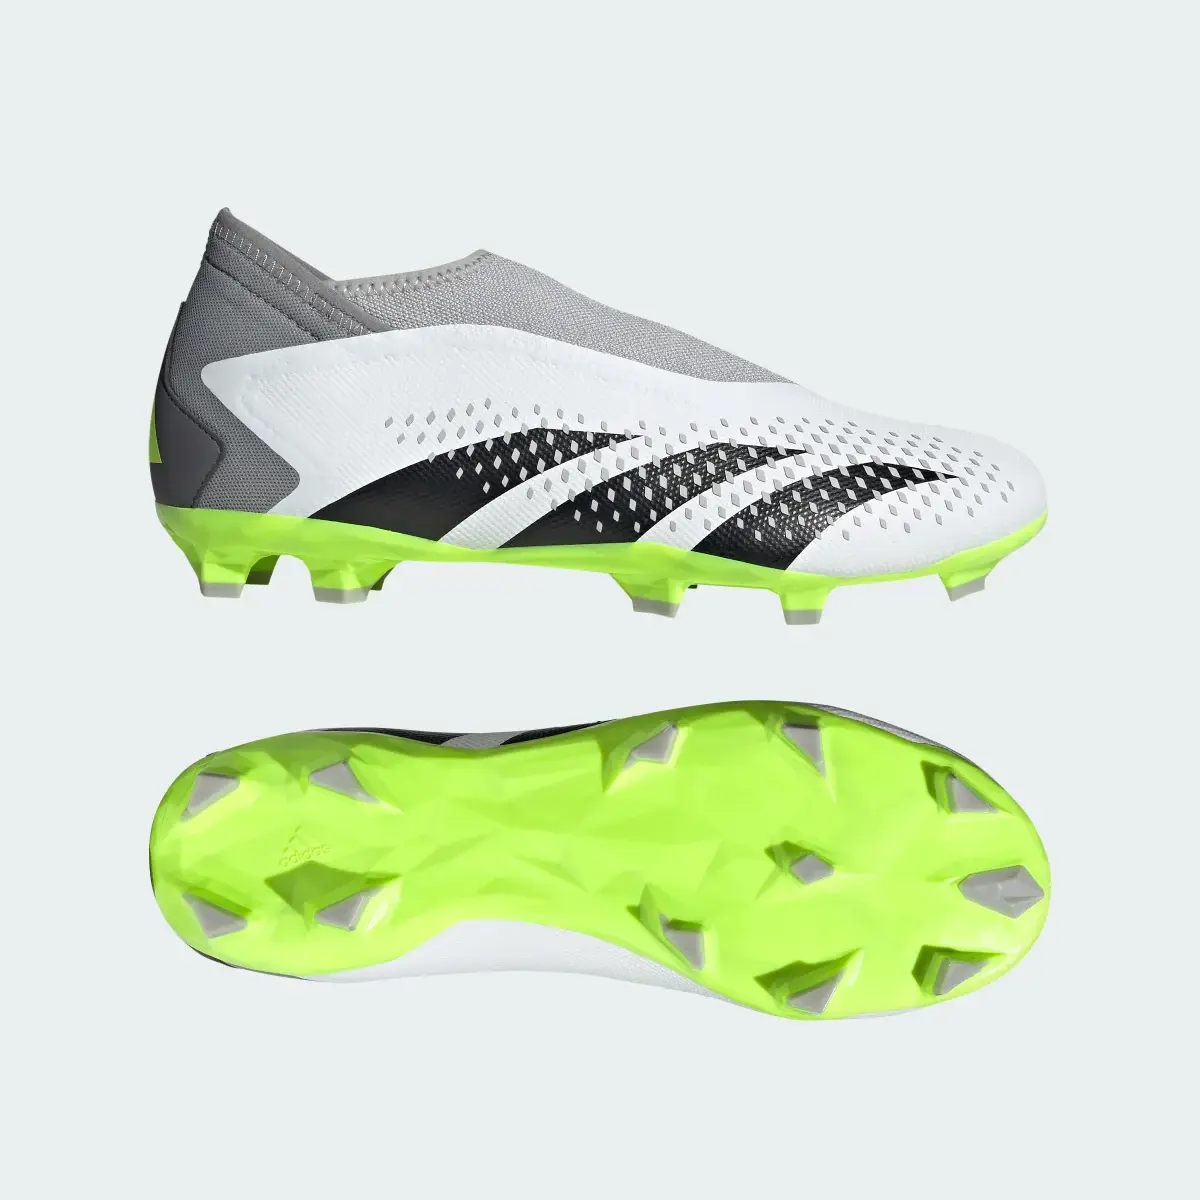 Adidas Predator Accuracy.3 Laceless Firm Ground Boots. 1